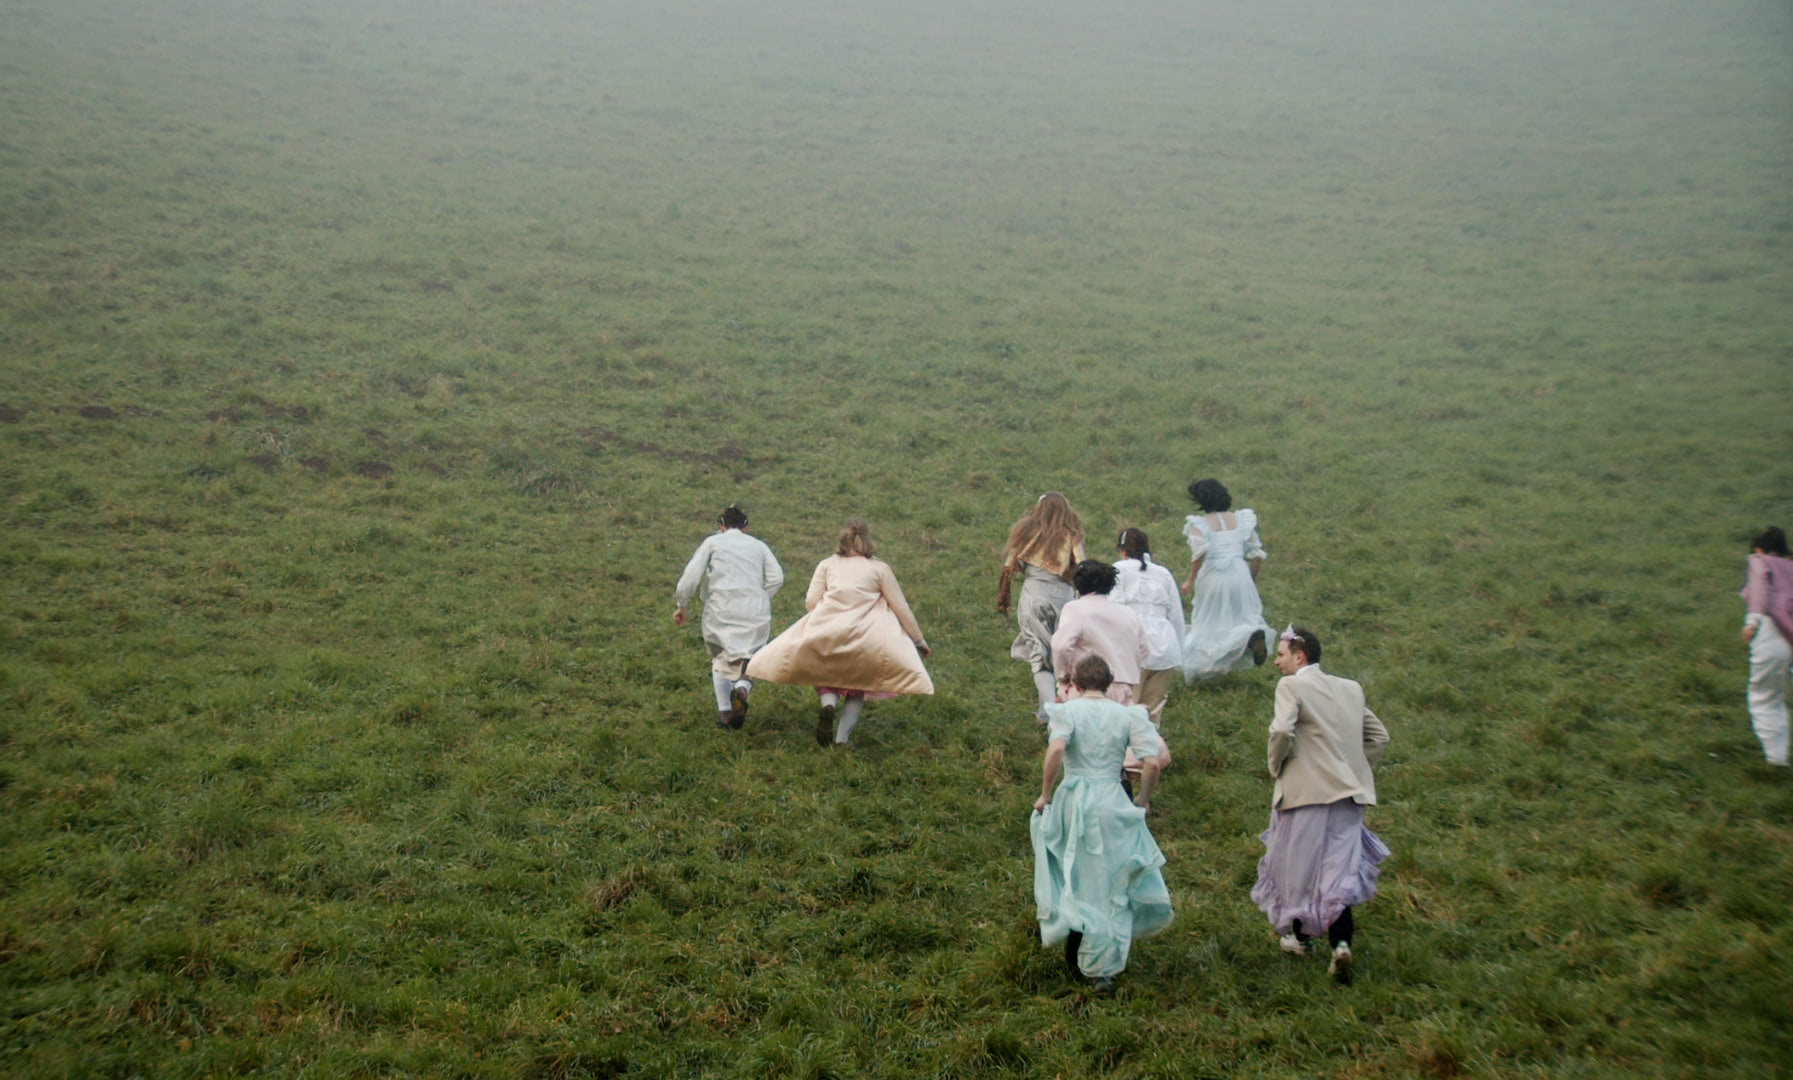 A crowd of people in white dresses running up a grassy hill in the fog.